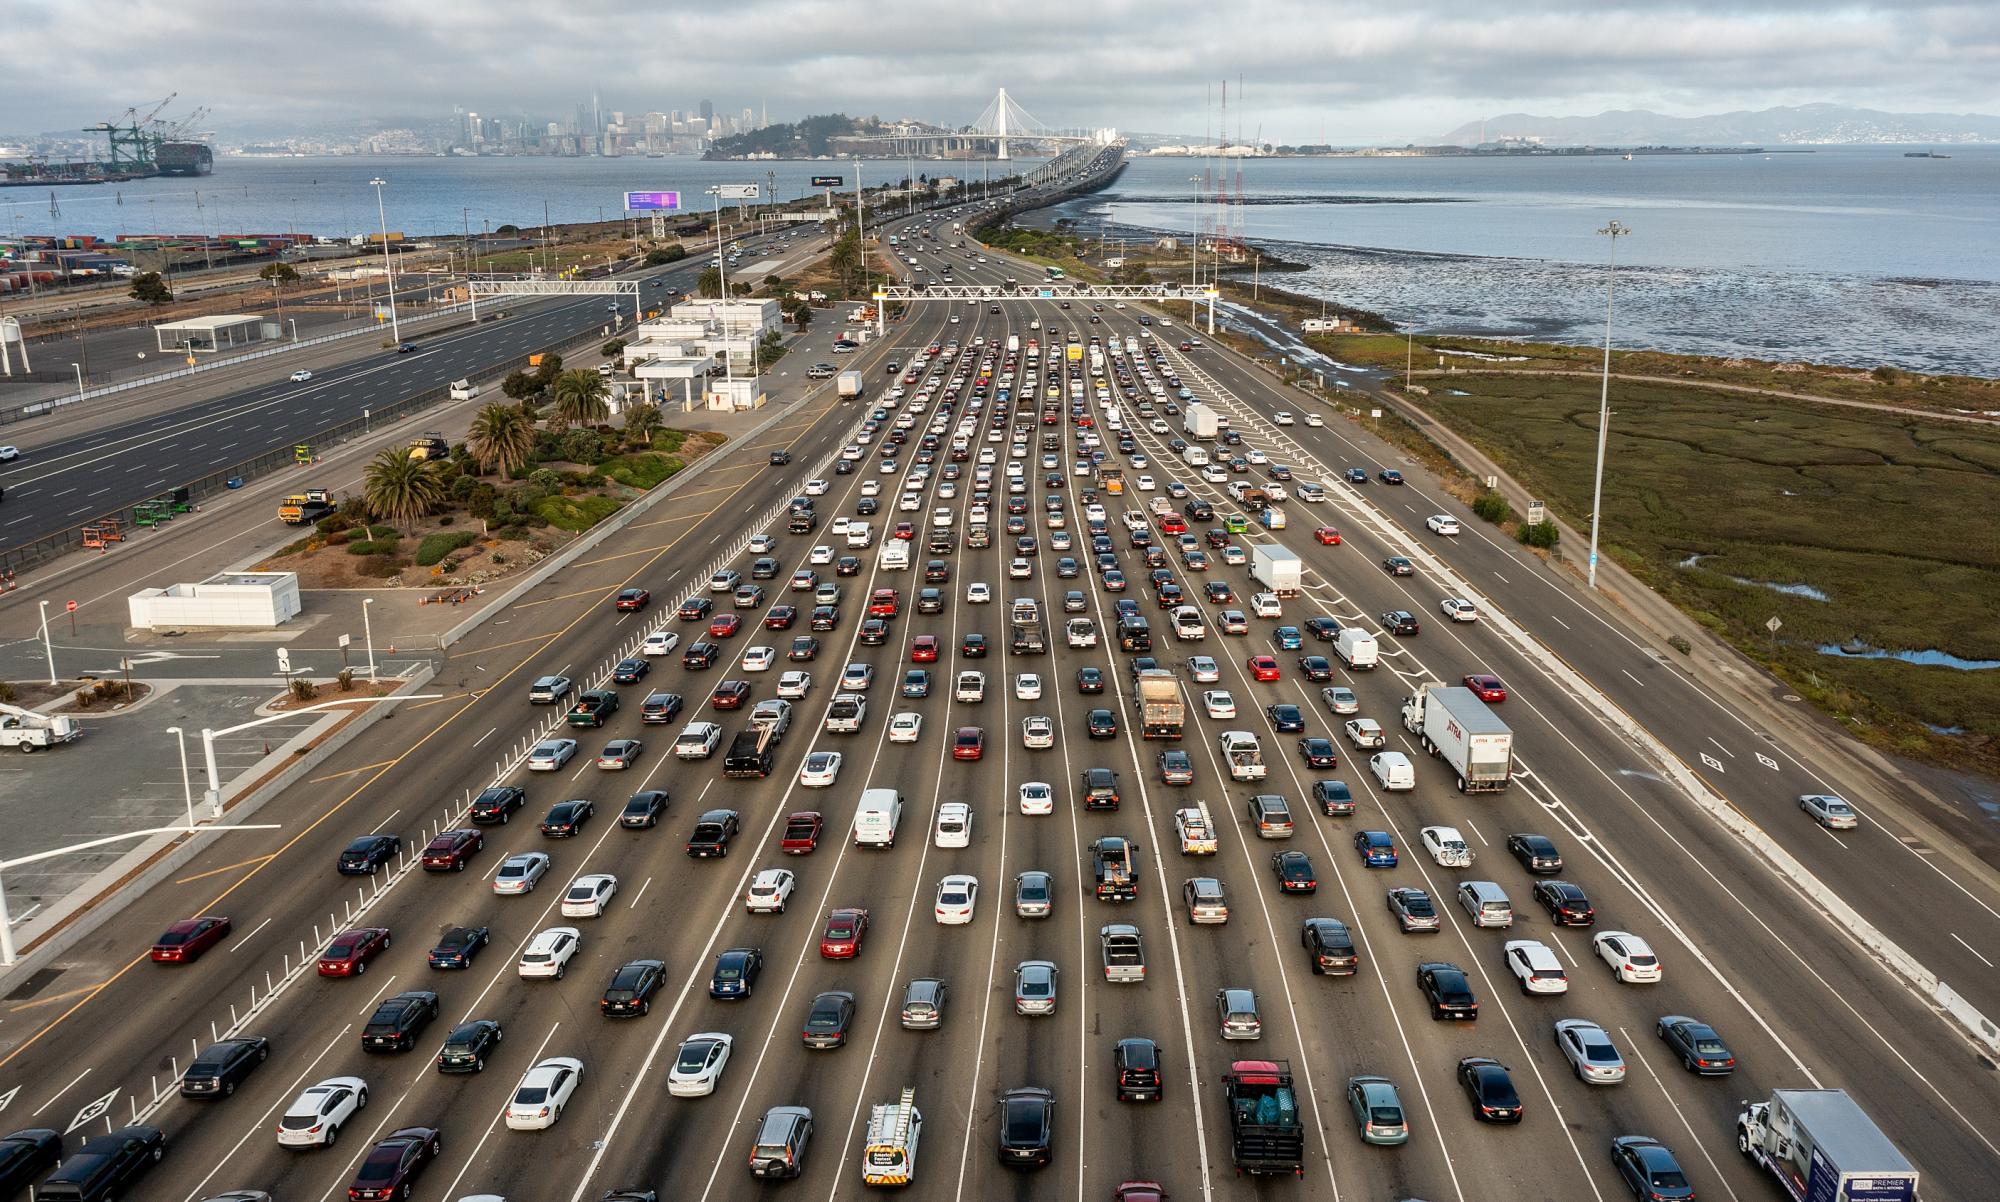 Traffic on Westbound Interstate 80 entering the Bay Bridge from Oakland/Emeryville to San Francisco